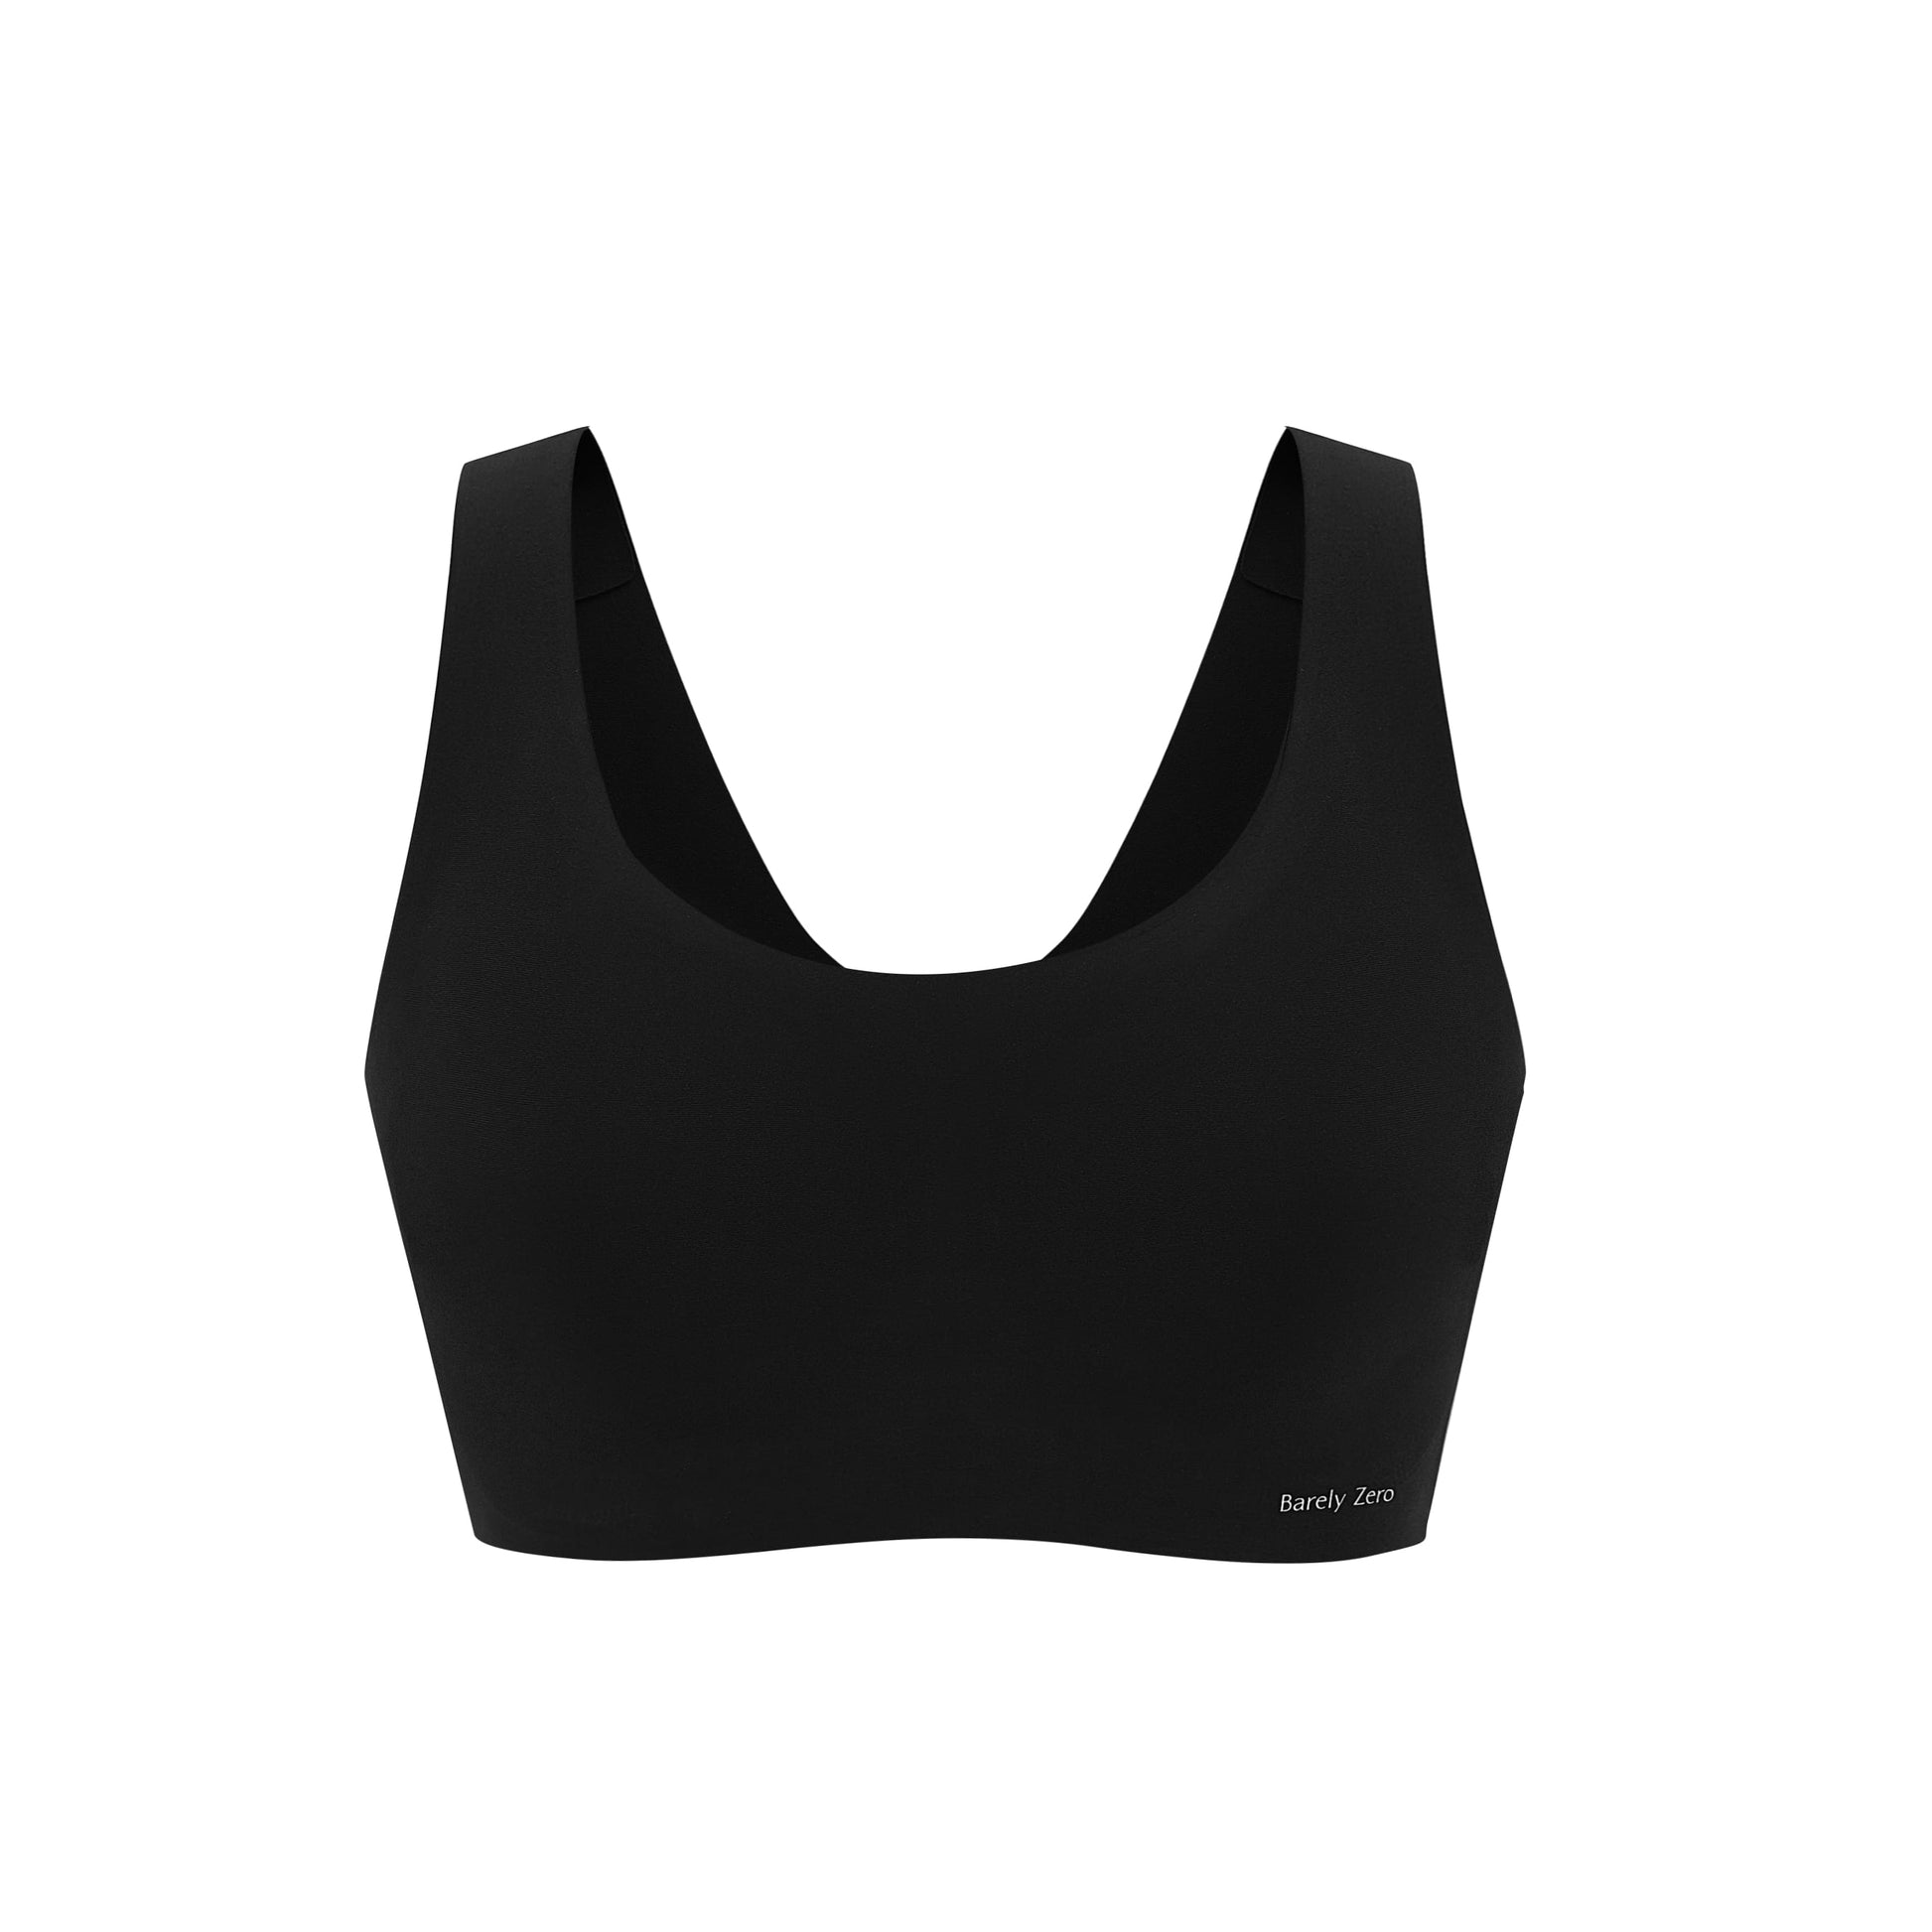 Flat lay image of black bra with thick straps